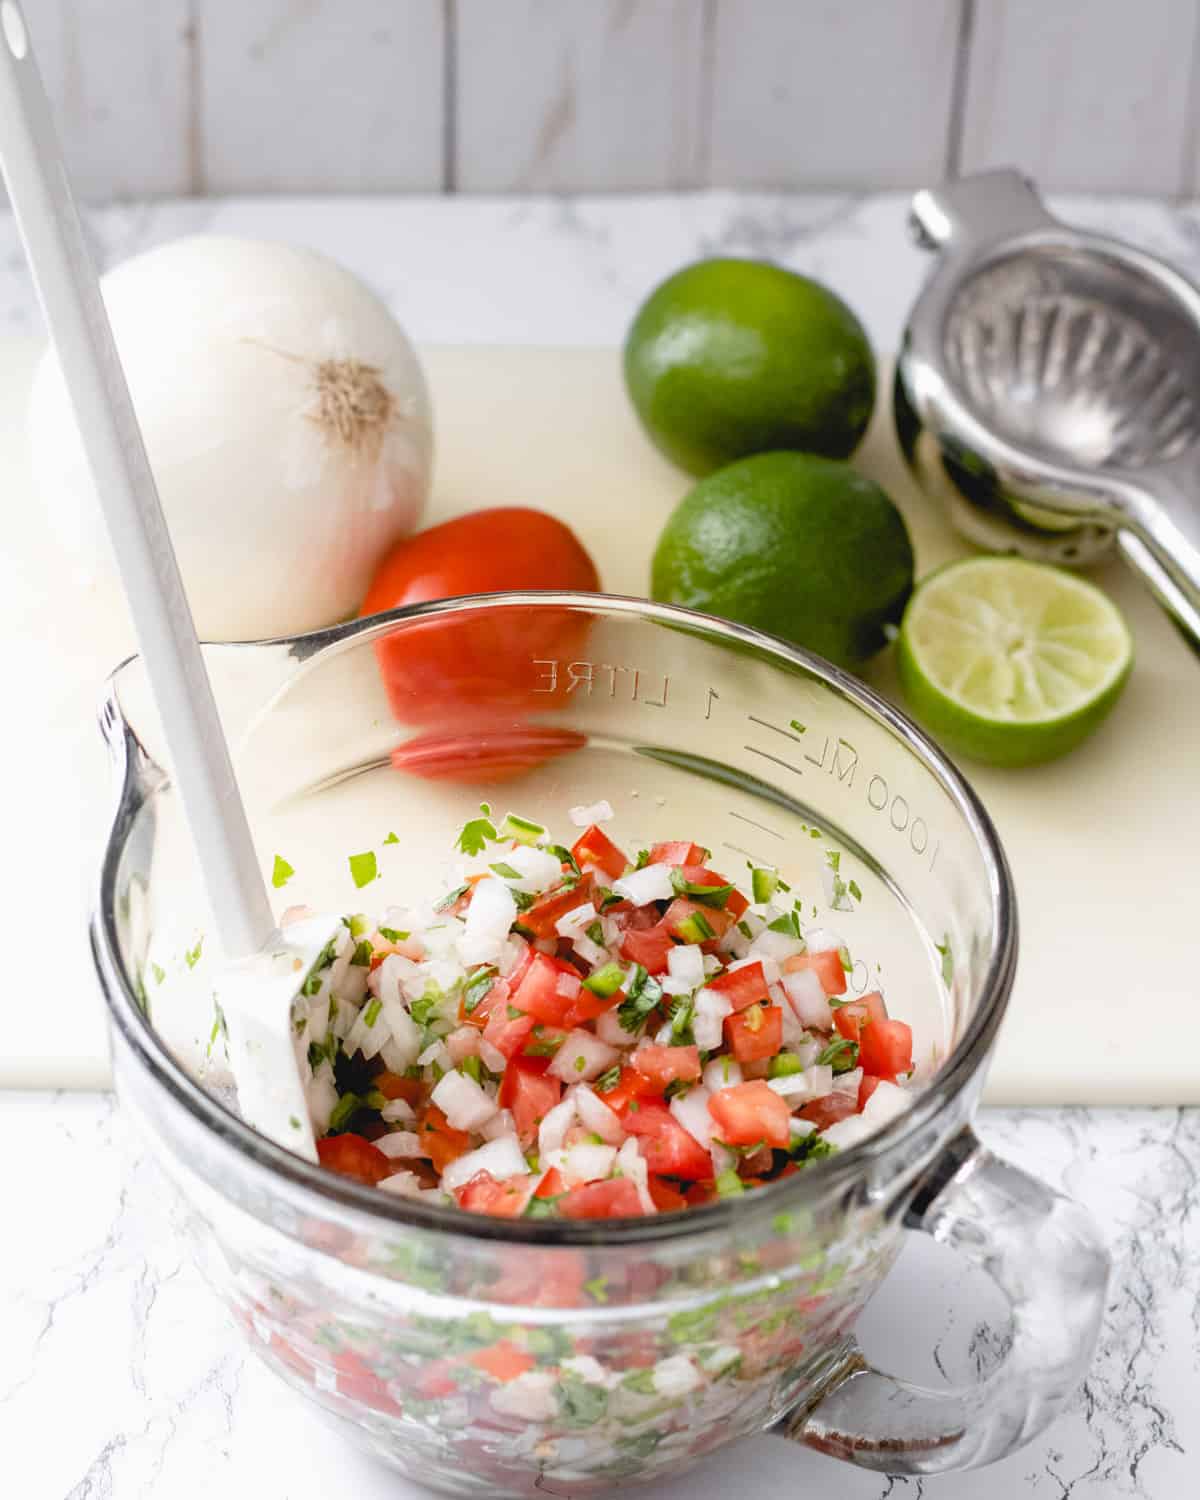 Bowl of pico de gallo with onion, tomato, and limes on a cutting board in the background.